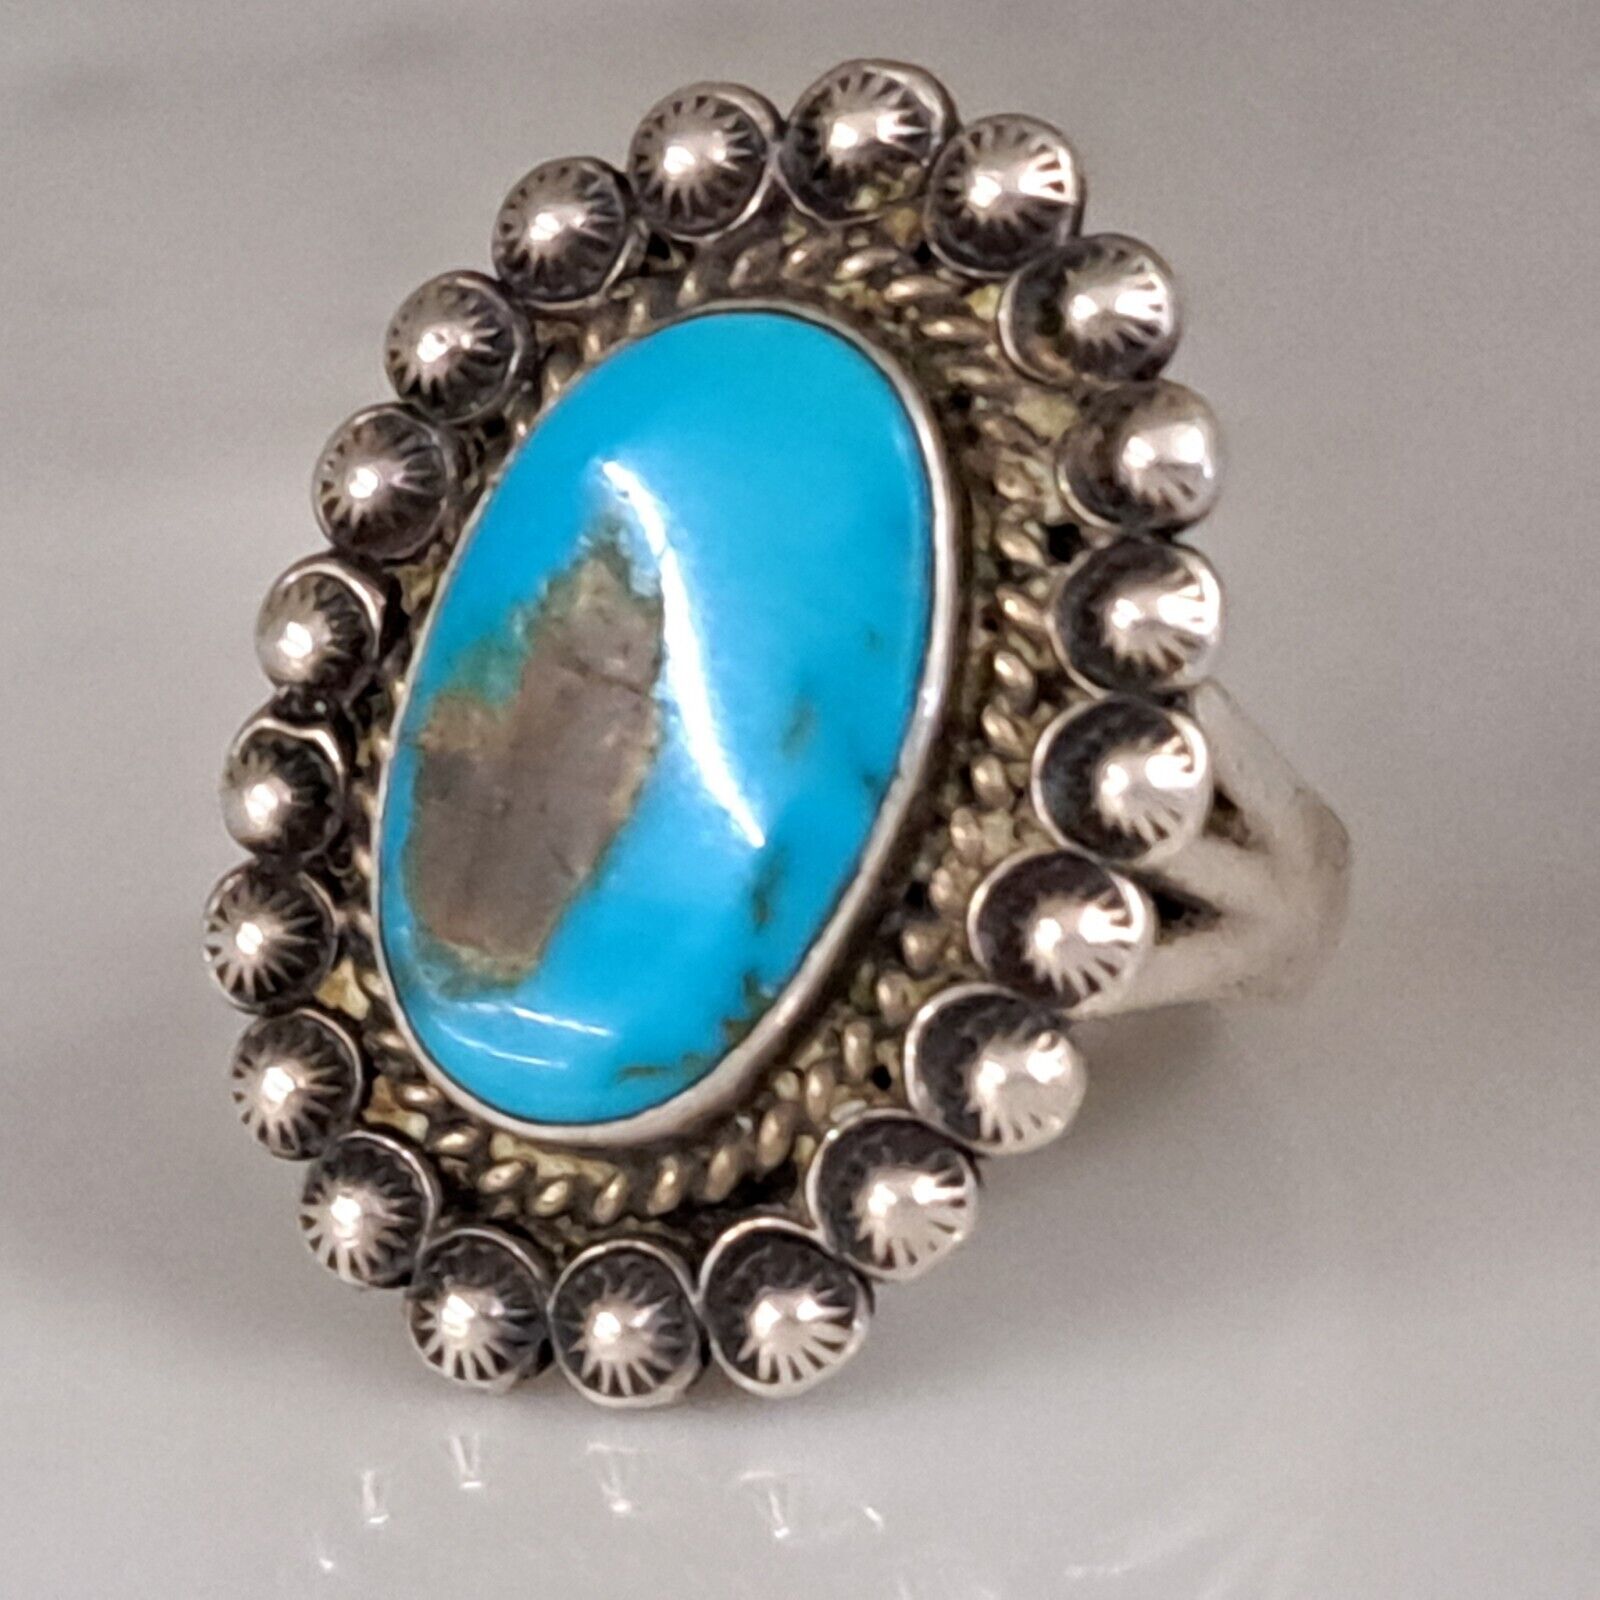 BEAUTIFUL NATIVE AMERICAN NAVAJO STERLING SILVER TURQUOISE RING SZ 8.5